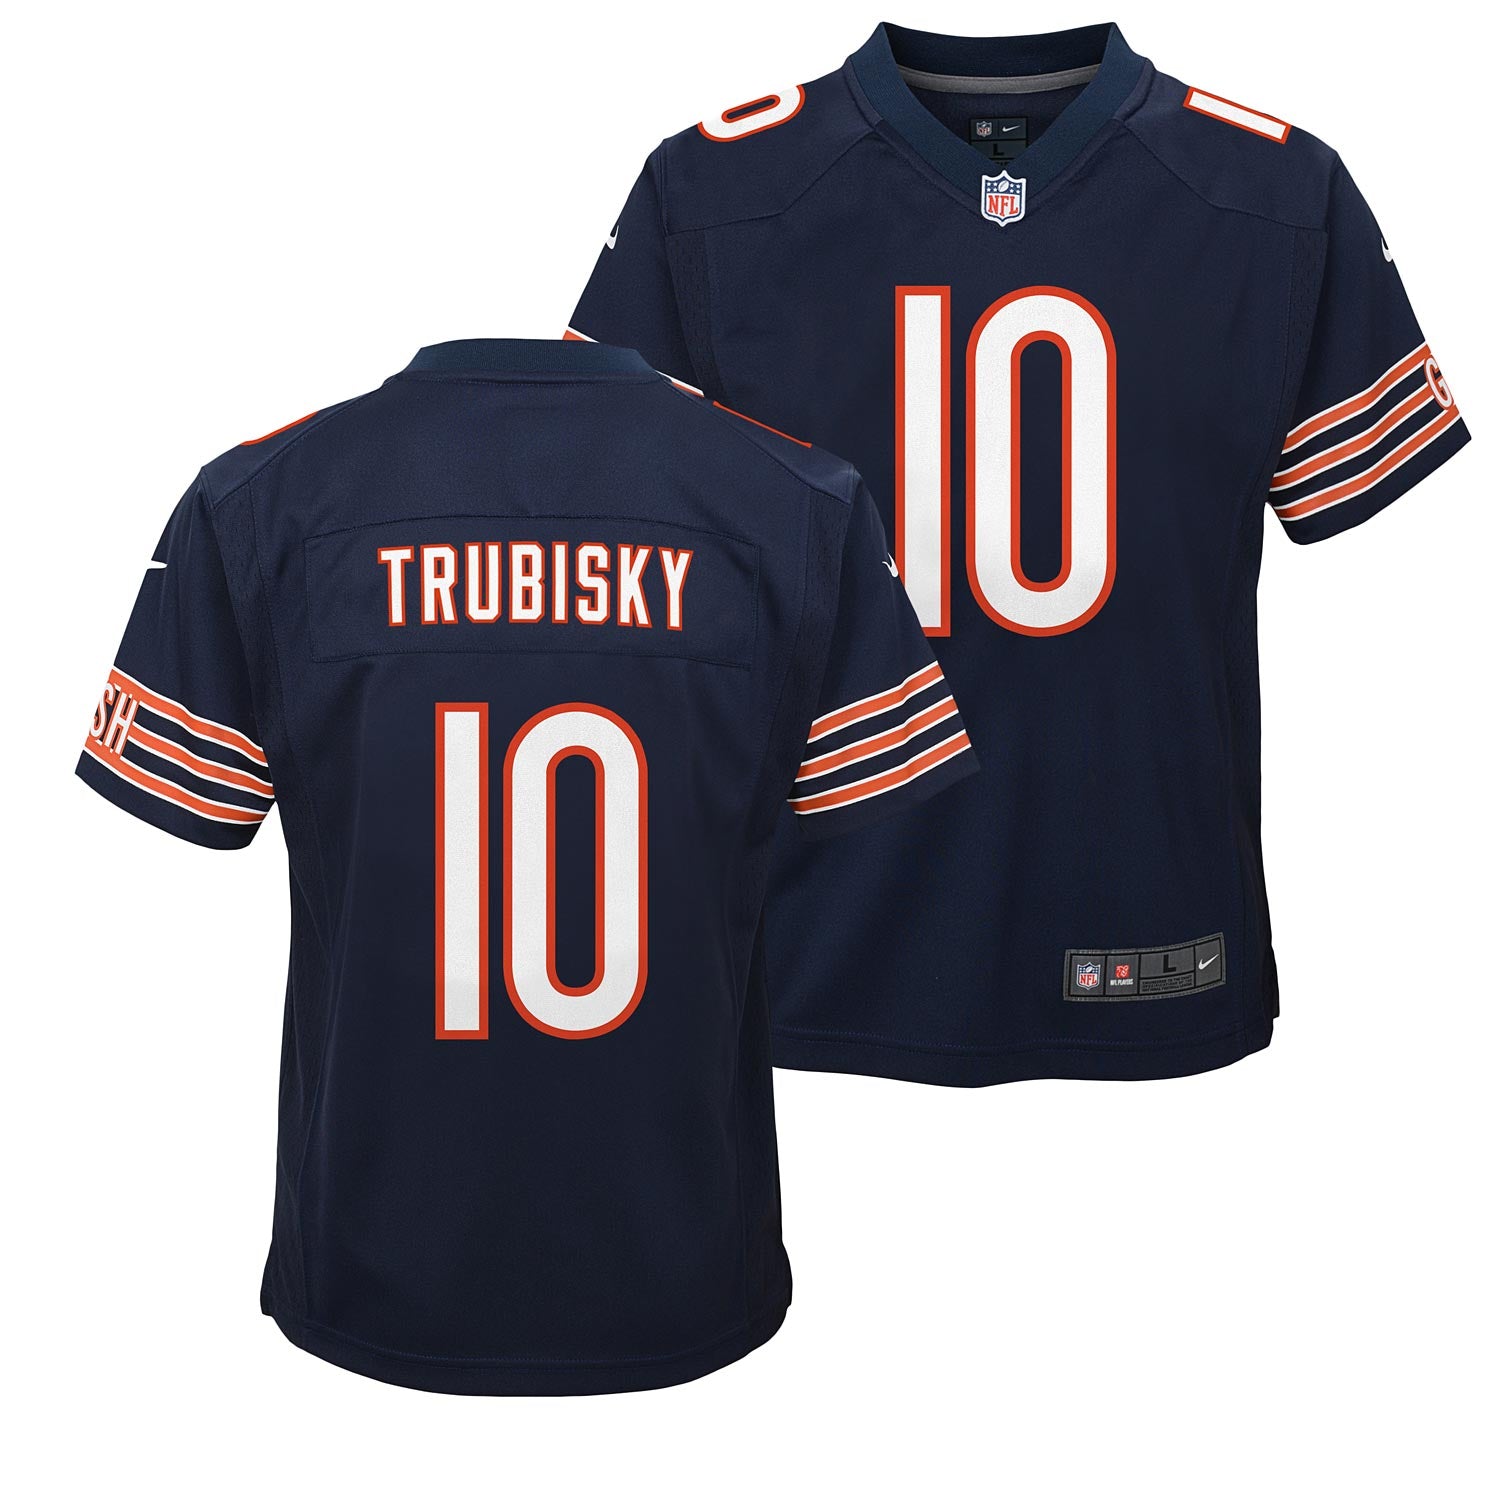 Men's Nike Mitchell Trubisky Navy Chicago Bears Game Player Jersey